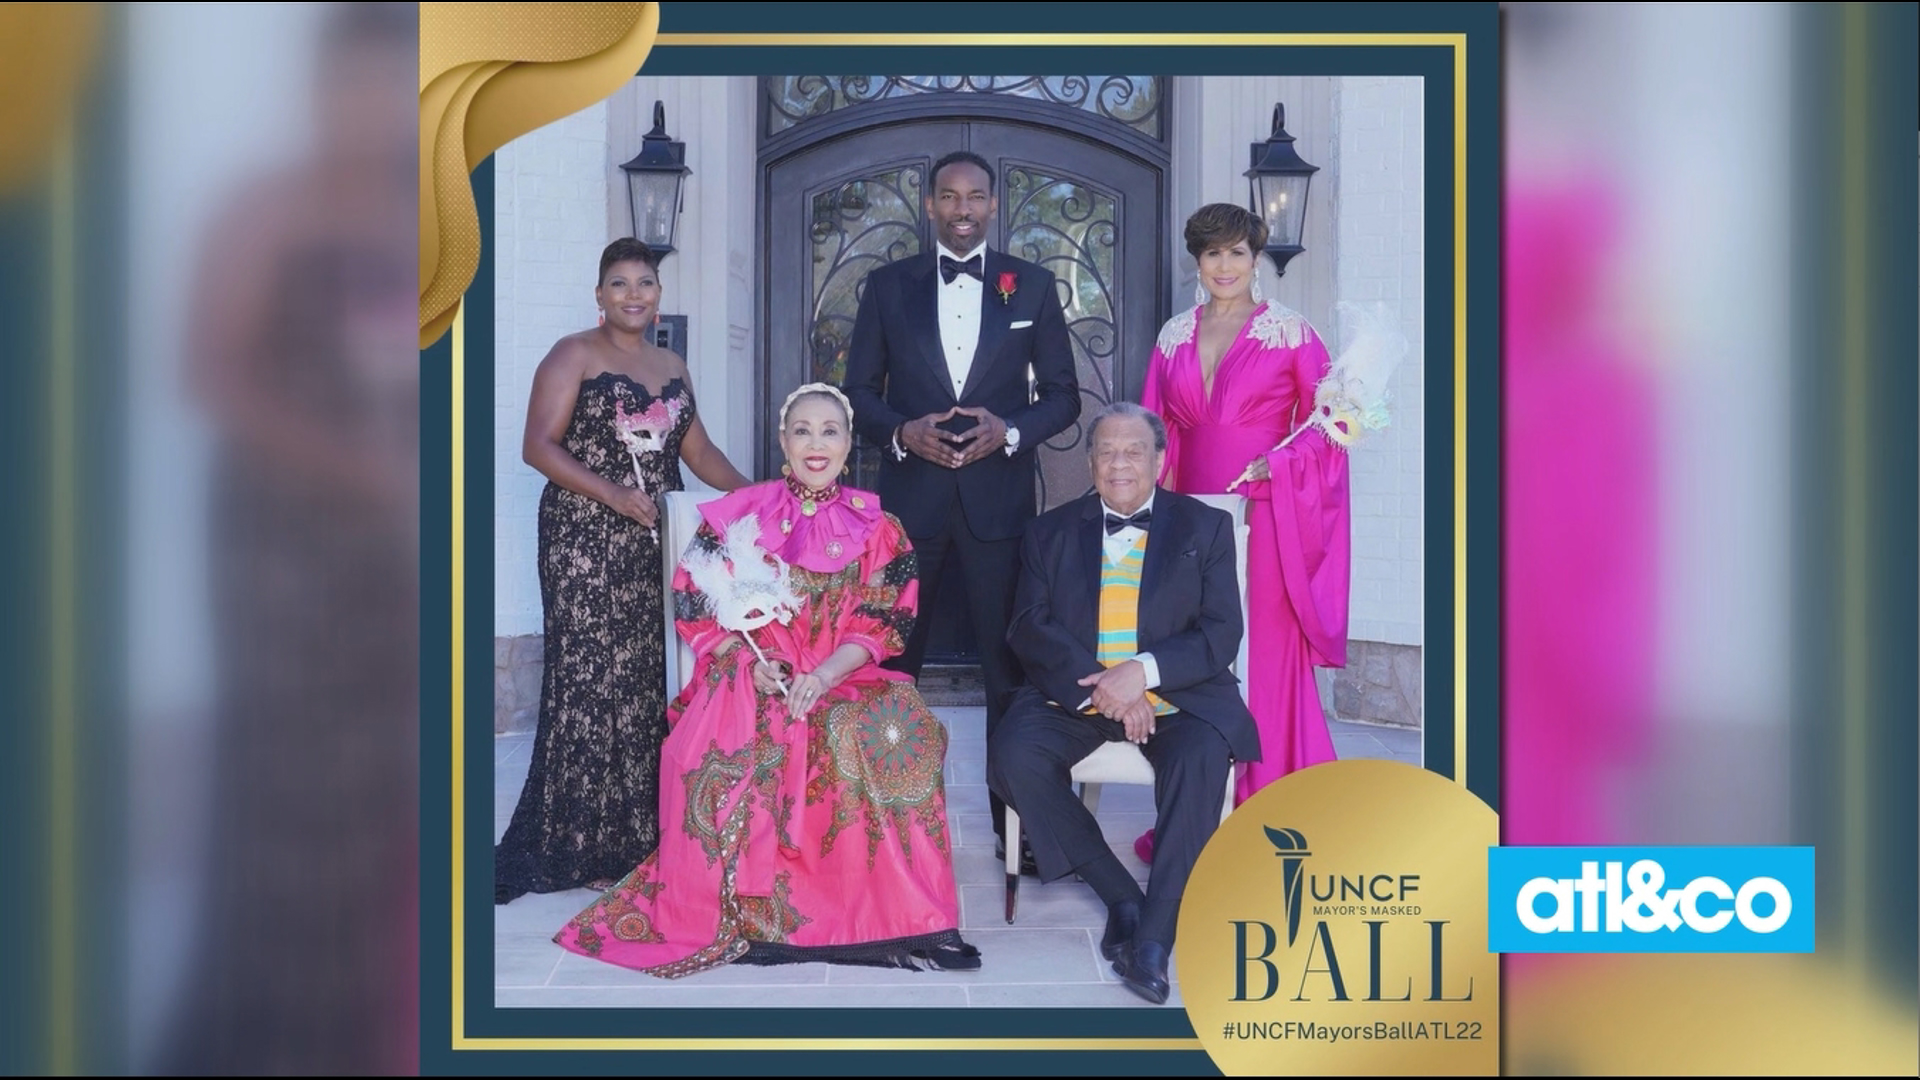 The UNCF Mayor's Masked Ball Atlanta is a premier fundraising gala that raises awareness of the contributions of historically Black colleges and universities.